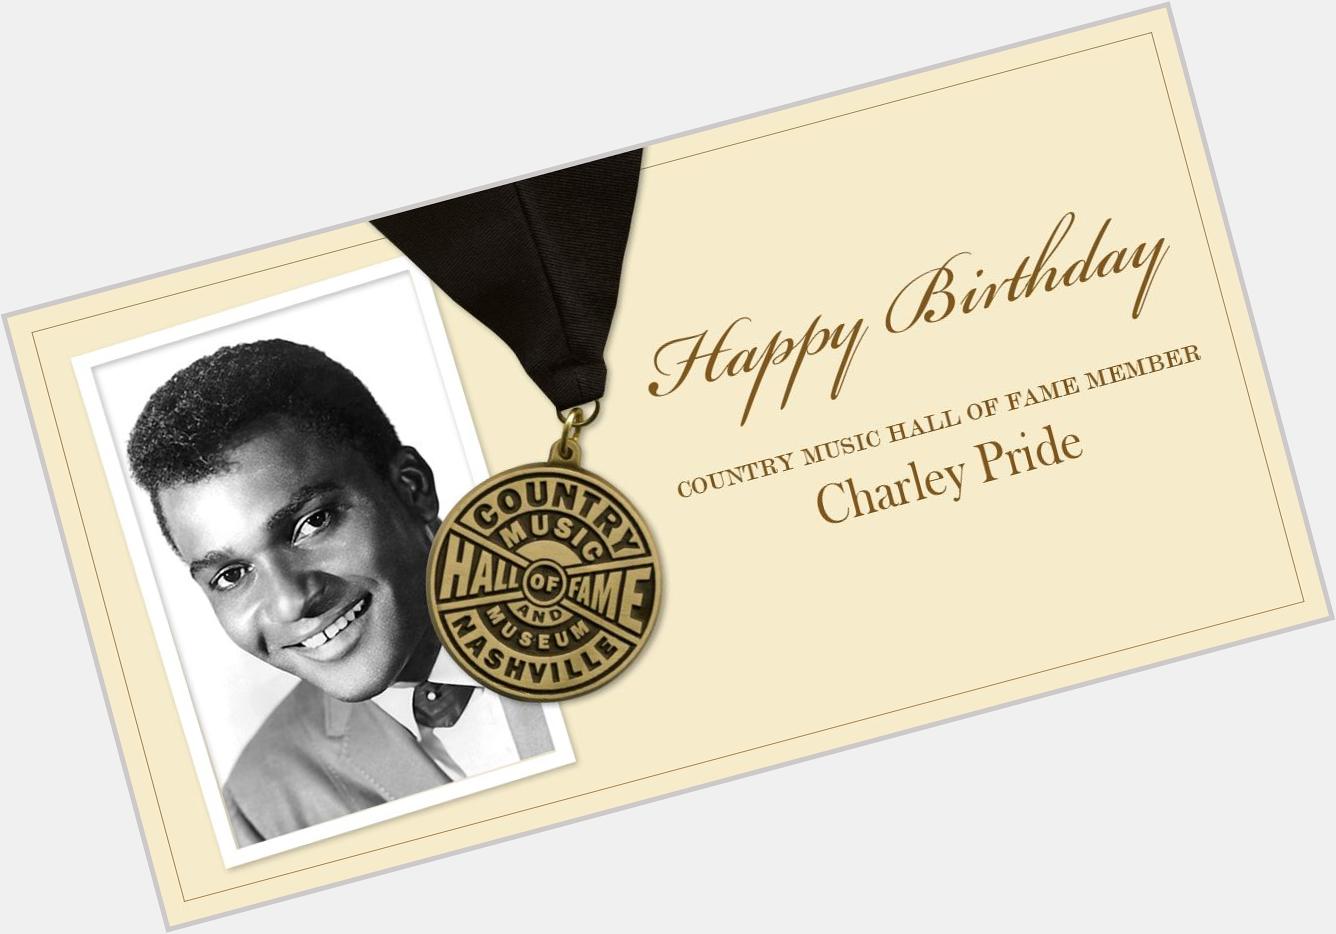 Help us wish Country Music Hall of Fame member Charley Pride a very happy birthday today! 